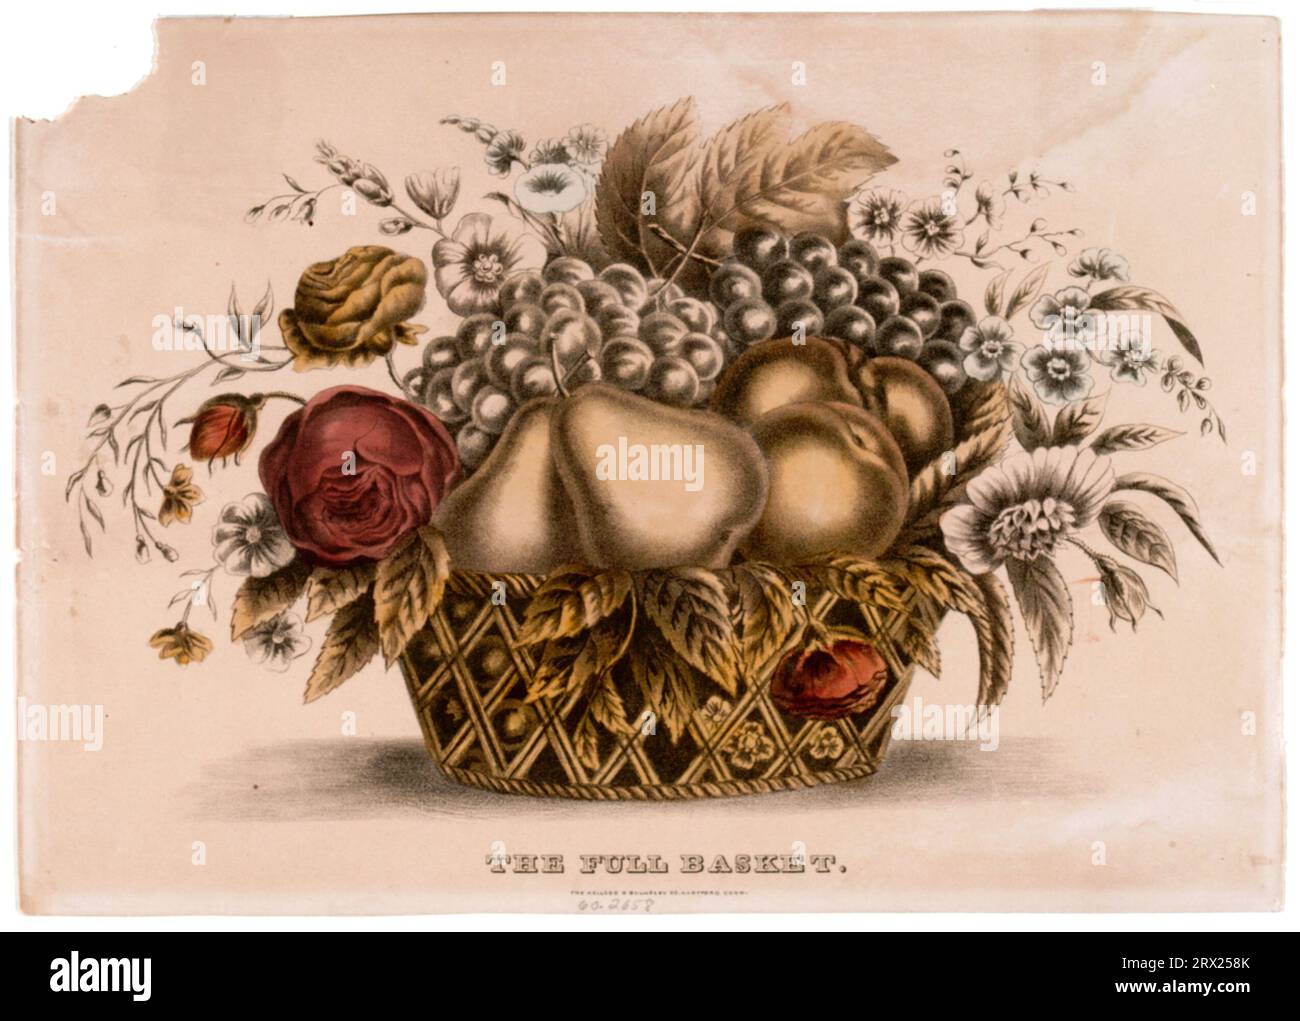 Lithograph, 'The Full Basket'. DL*60.2658. Peters Prints Collection. Stock Photo